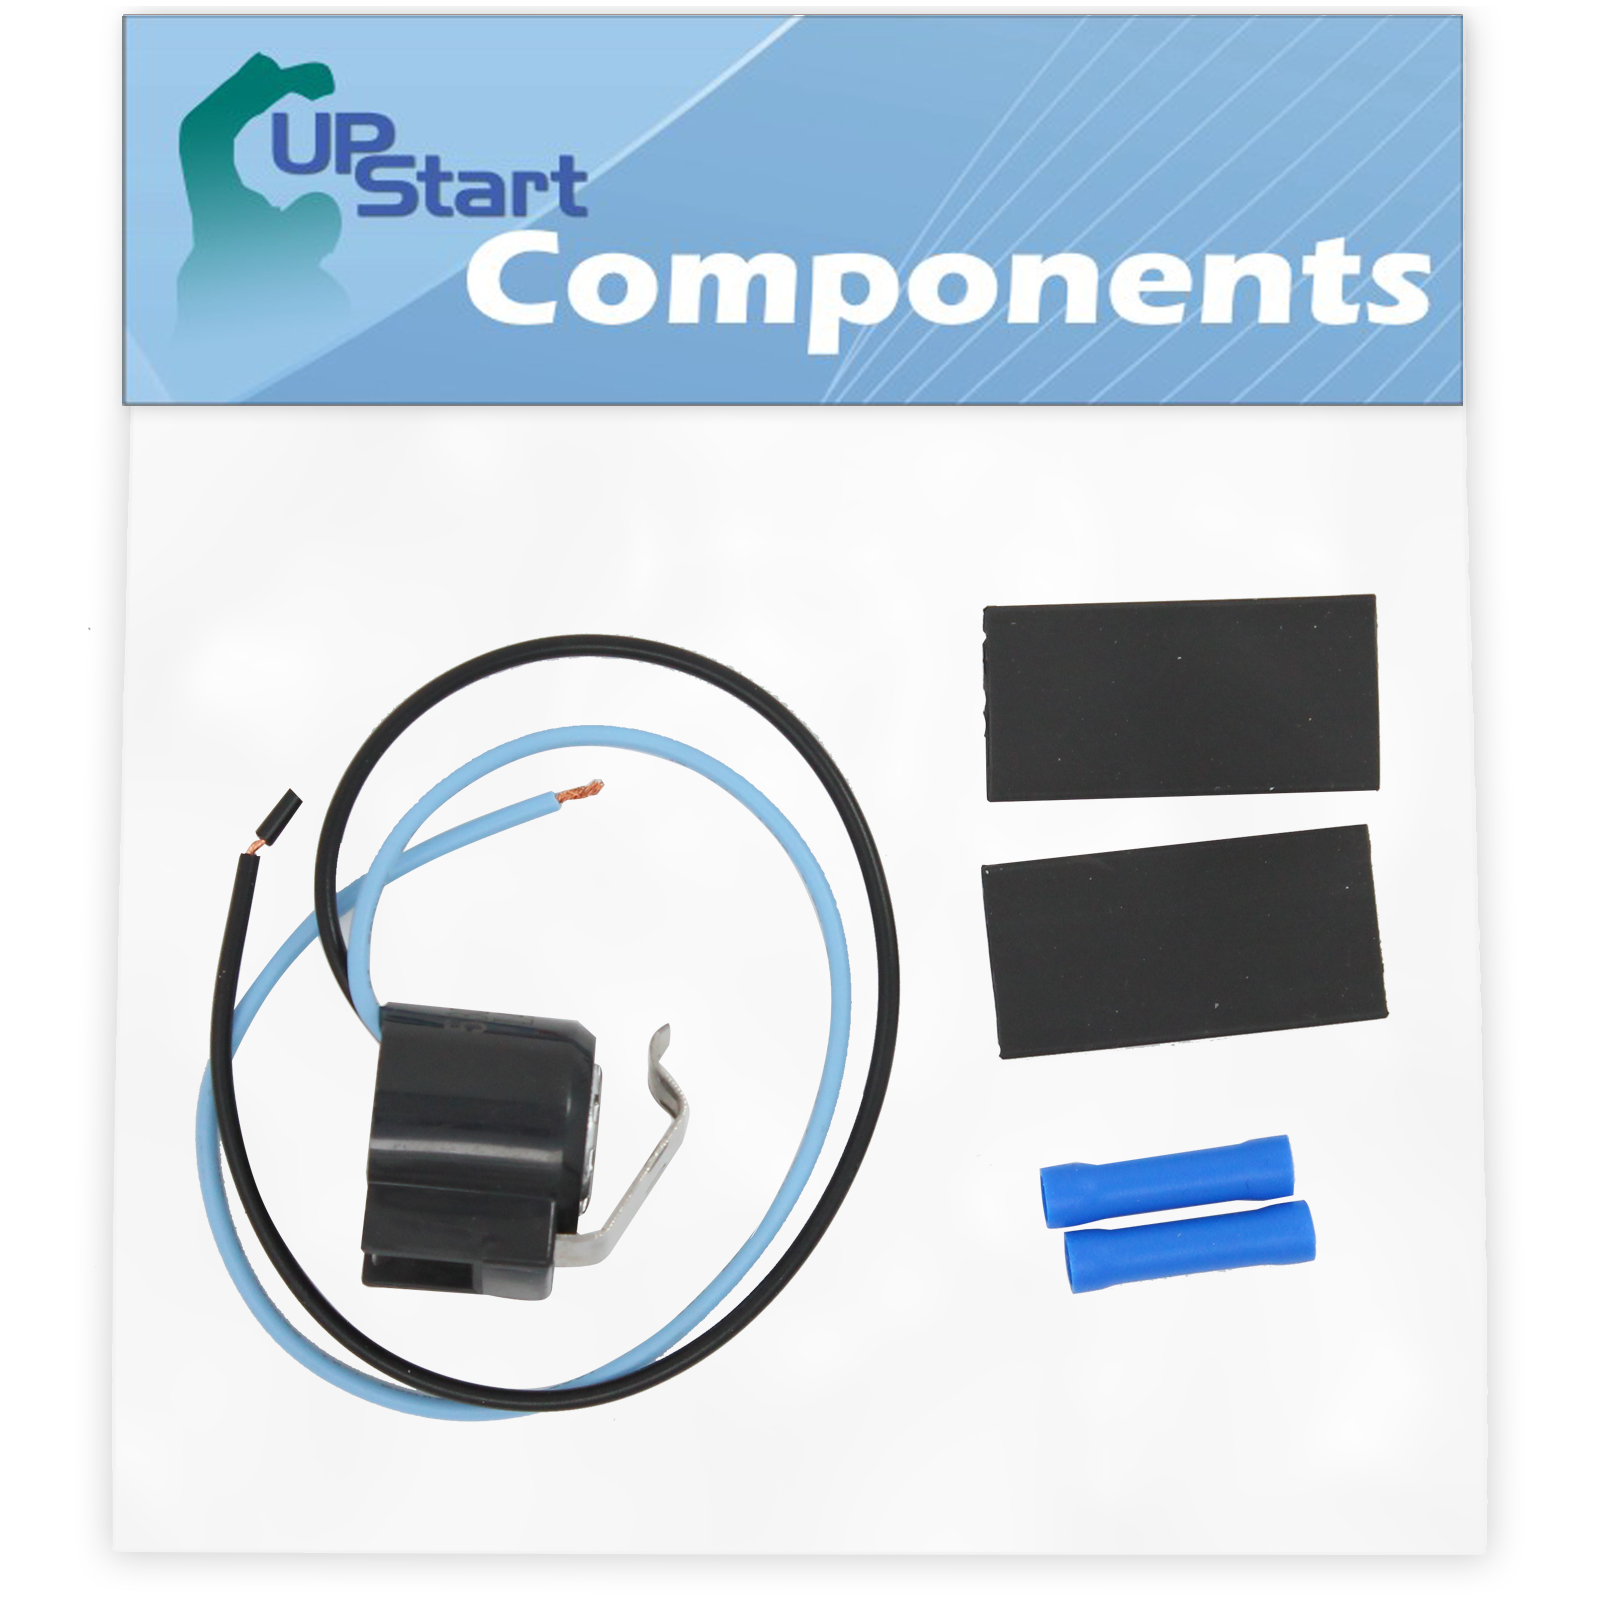 5303918214 Defrost Thermostat Replacement for Frigidaire GLHS68EGB1 Refrigerator - Compatible with 5303918214 Defrost Thermostat Kit - UpStart Components Brand - image 1 of 2